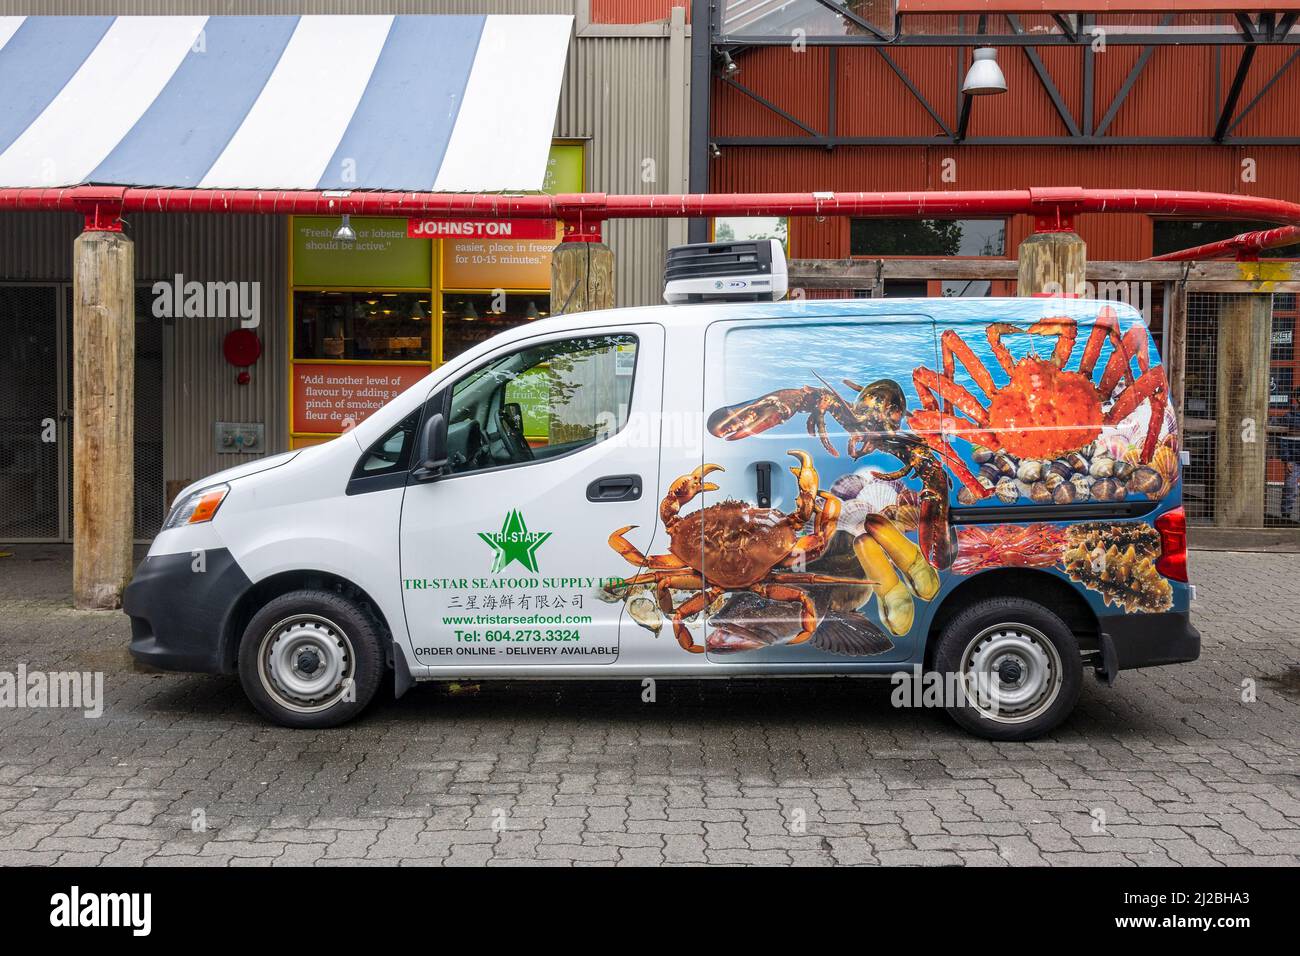 Seafood Delivery Van Nissan NV200 Compact Cargo Van Wrapped Advertising Tri-Star Seafood Supply Vancouver Canada At Granville Market Stock Photo